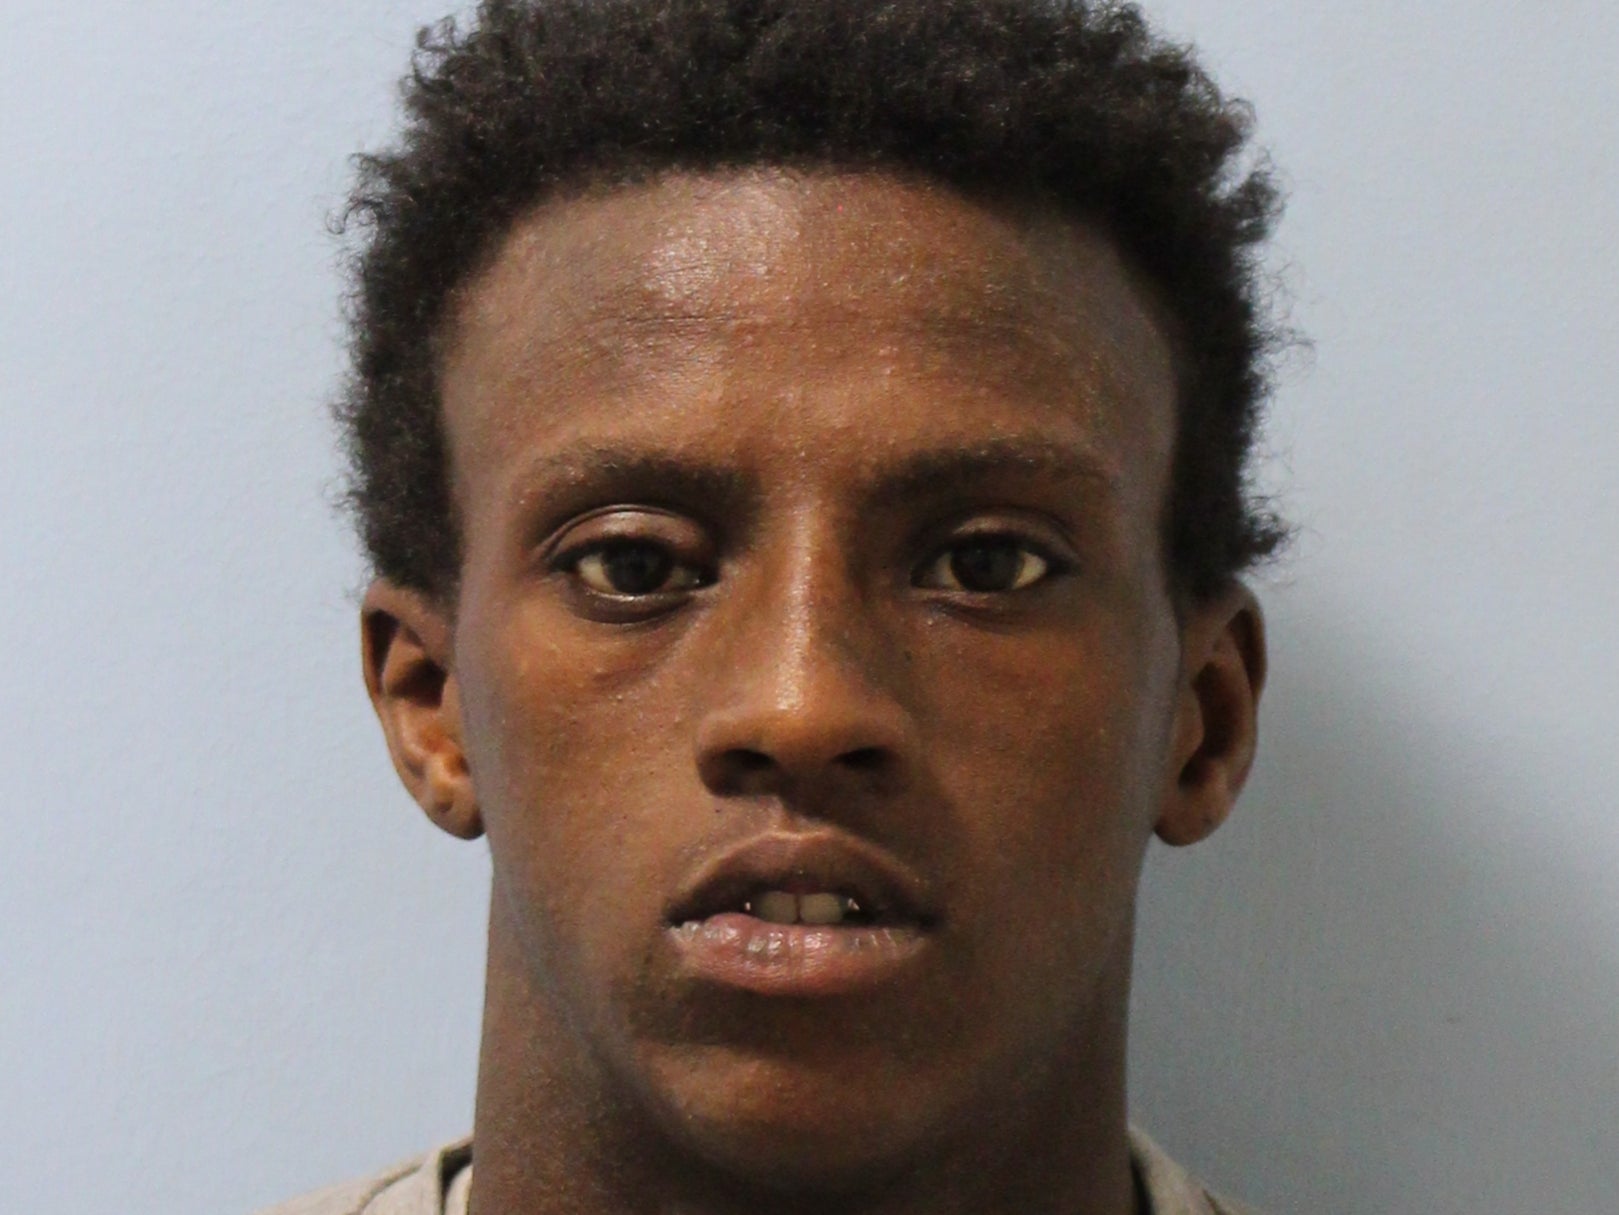 Mason Sani-Semedo, 19, (pictured) was found guilty alongside Cameron Robinson, 20, of shooting dead Chad Gordon, 27, on his doorstep in Finsbury Park, north London, in a case of mistaken identity.